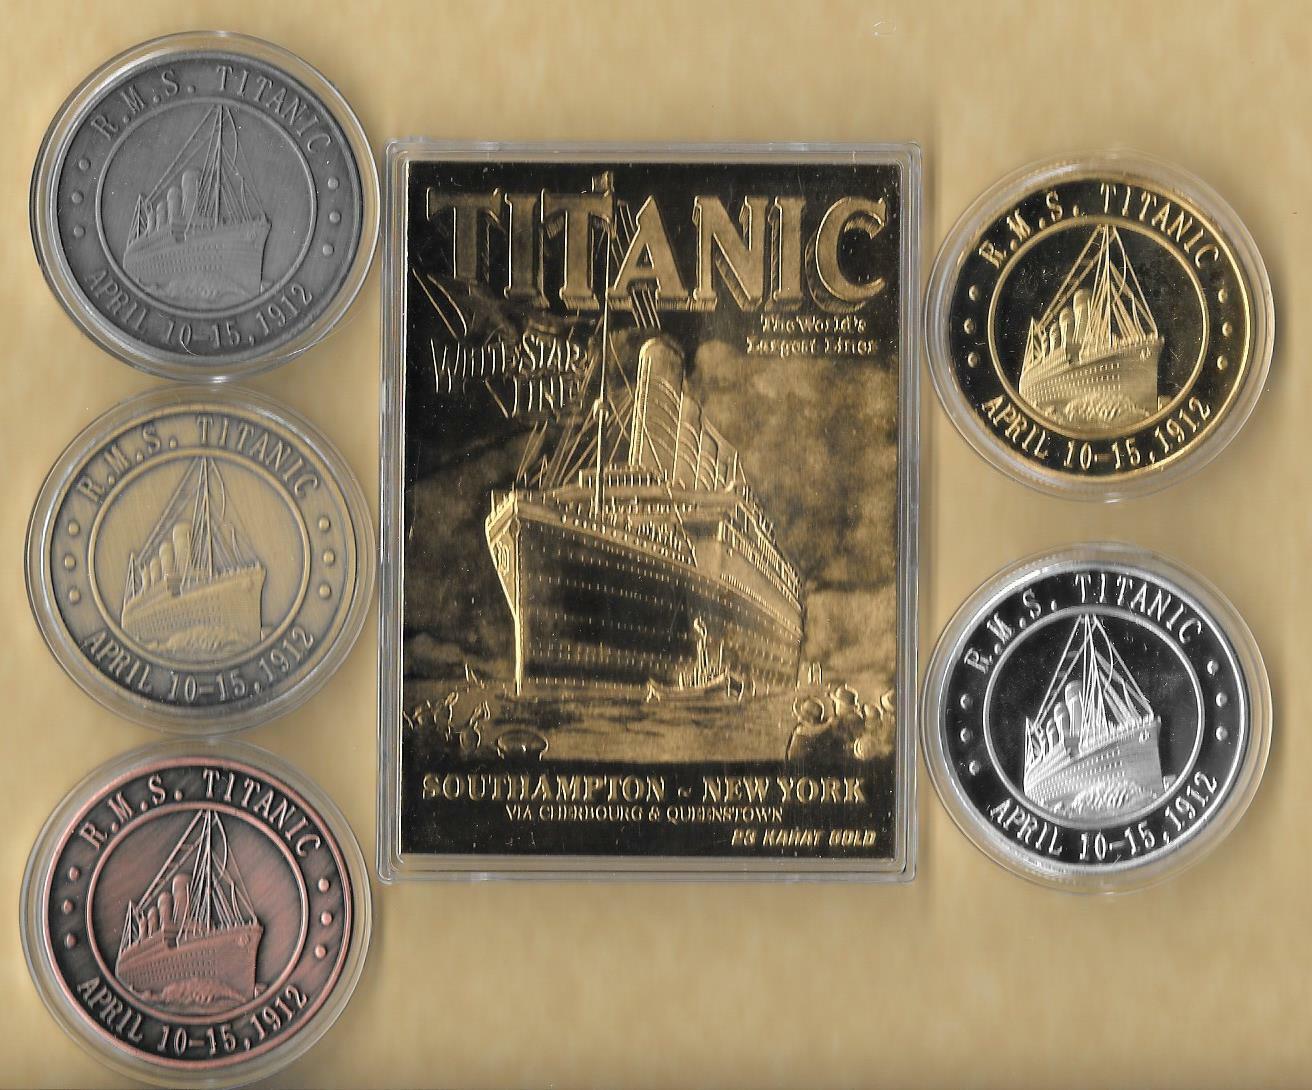 RMS TITANIC APRIL 10-15, 1912 23 KT K CARD Gold Silver Brass Copper Coins